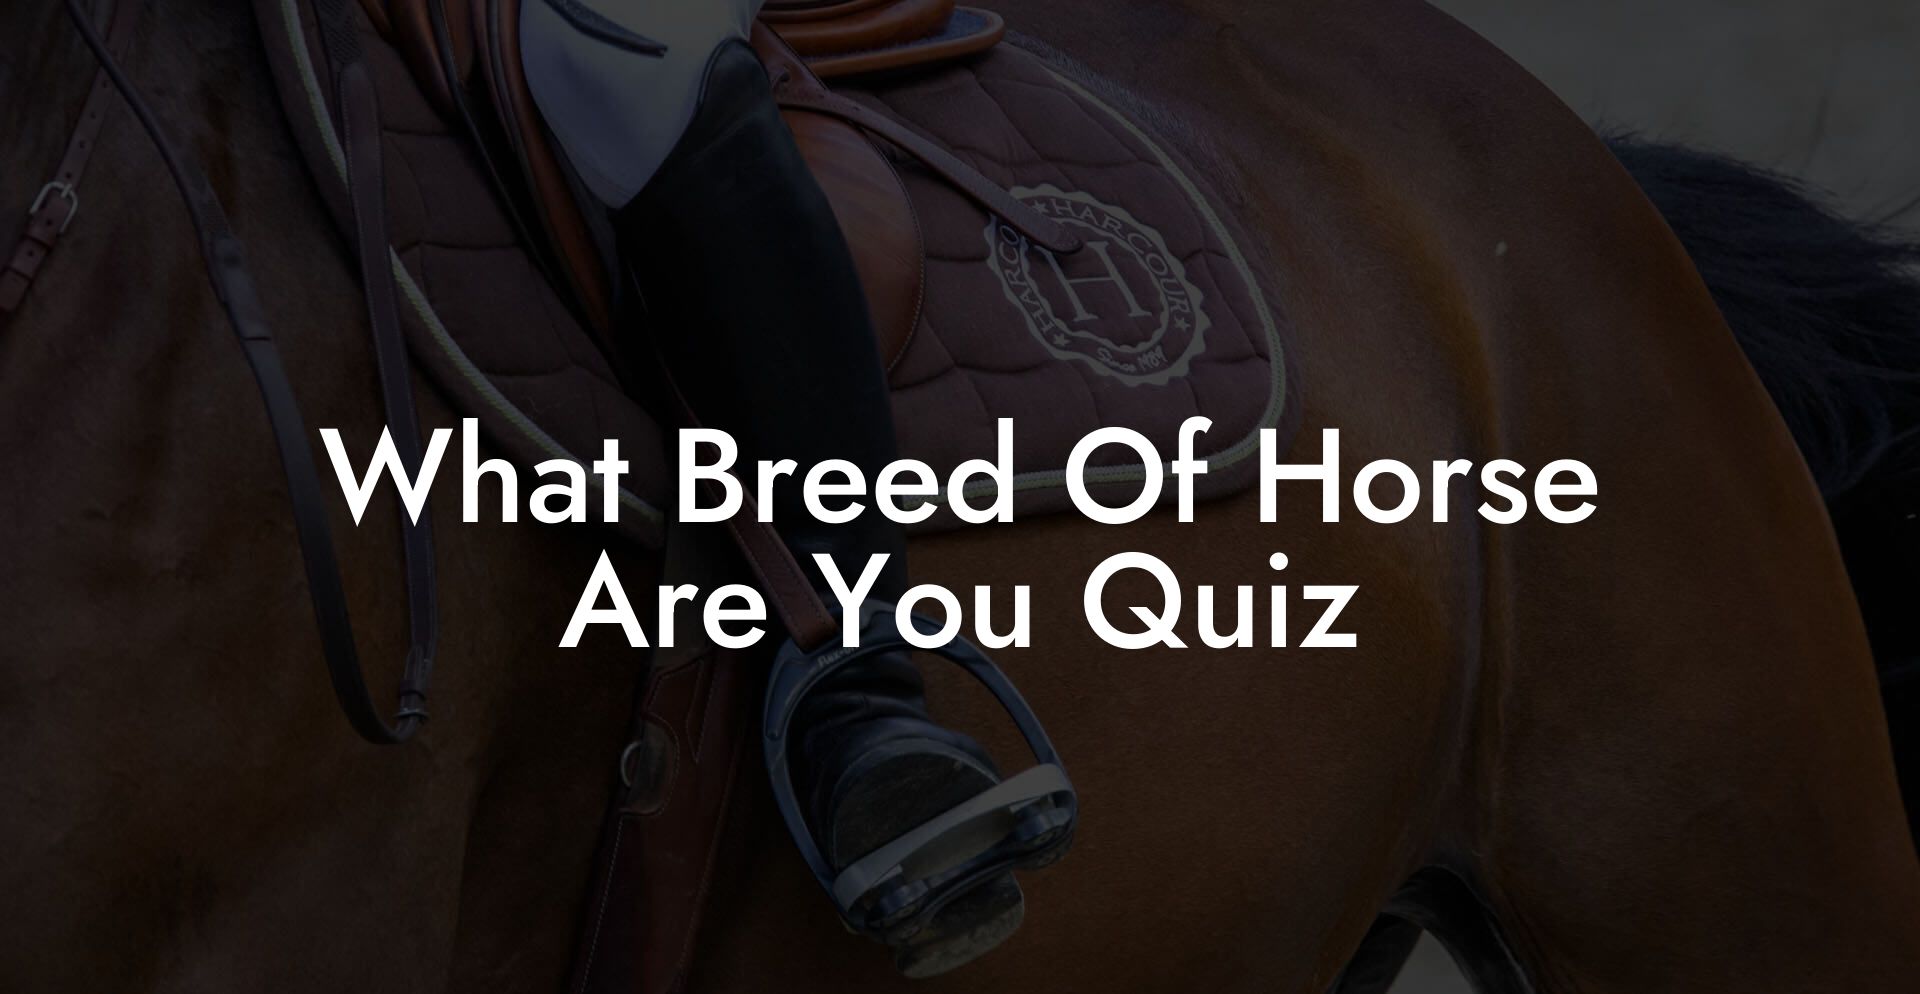 What Breed Of Horse Are You Quiz